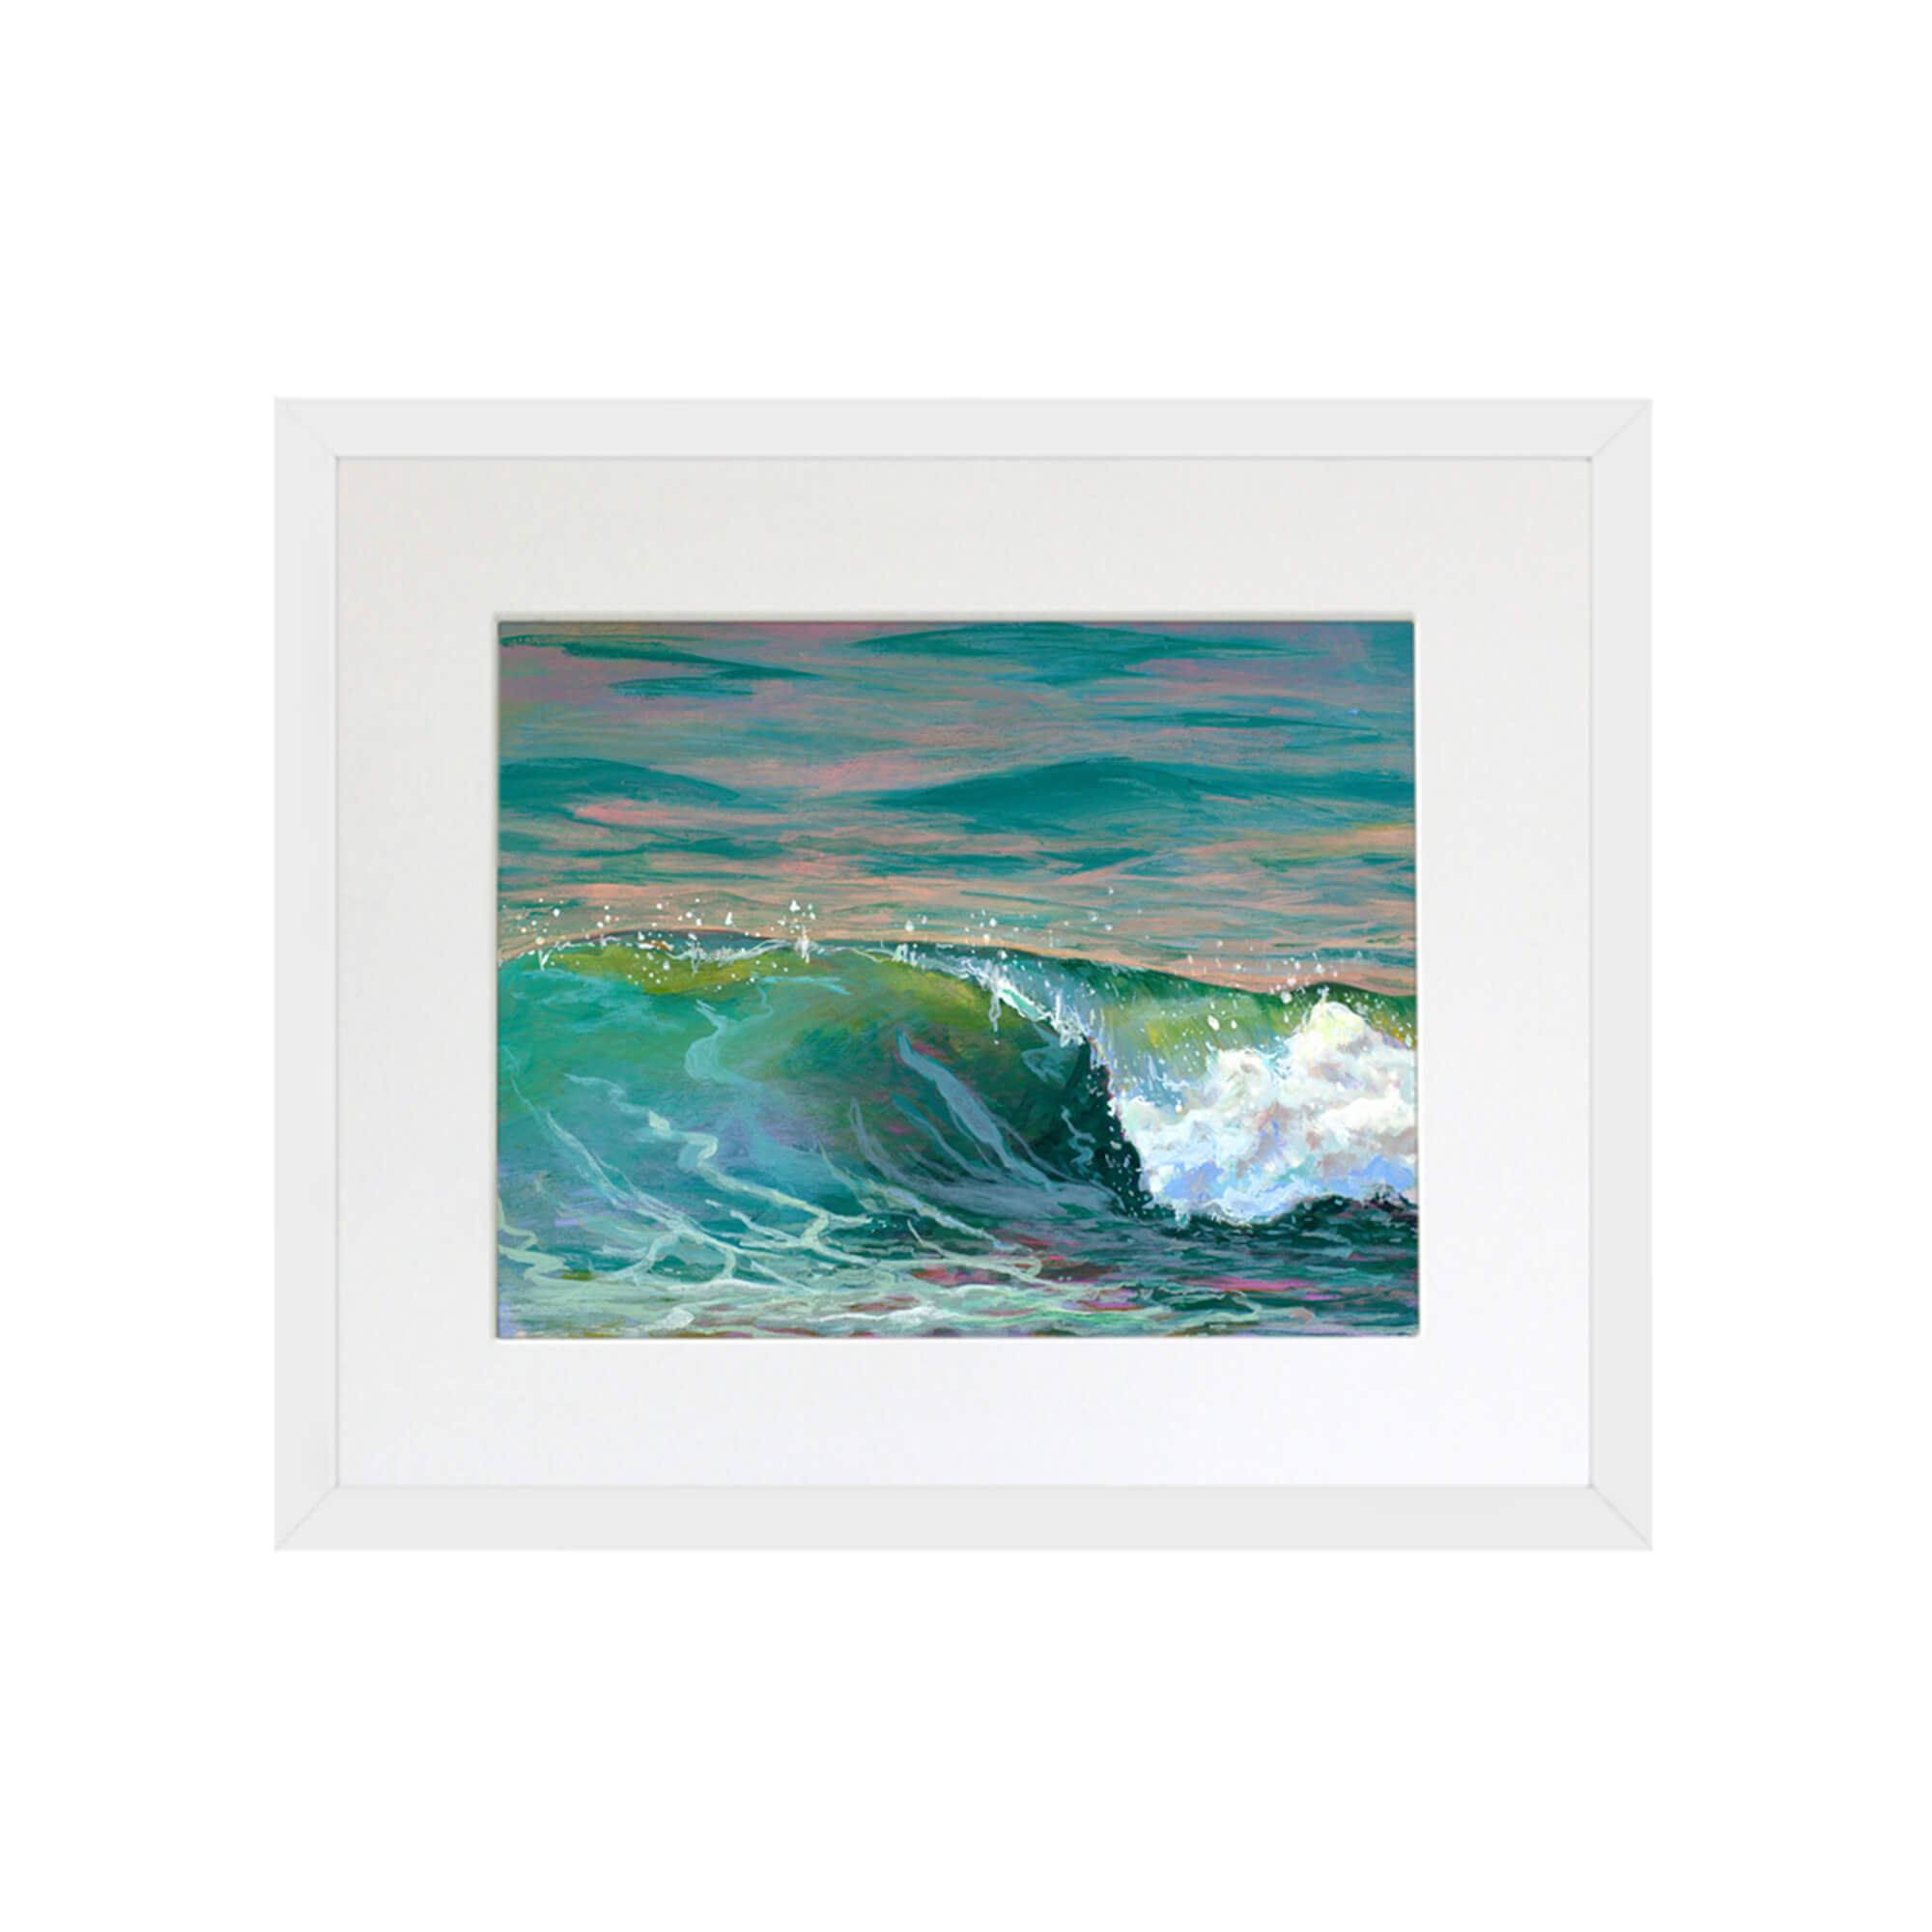 A wave with different shades of green by Hawaii artist Lindsay Wilkins